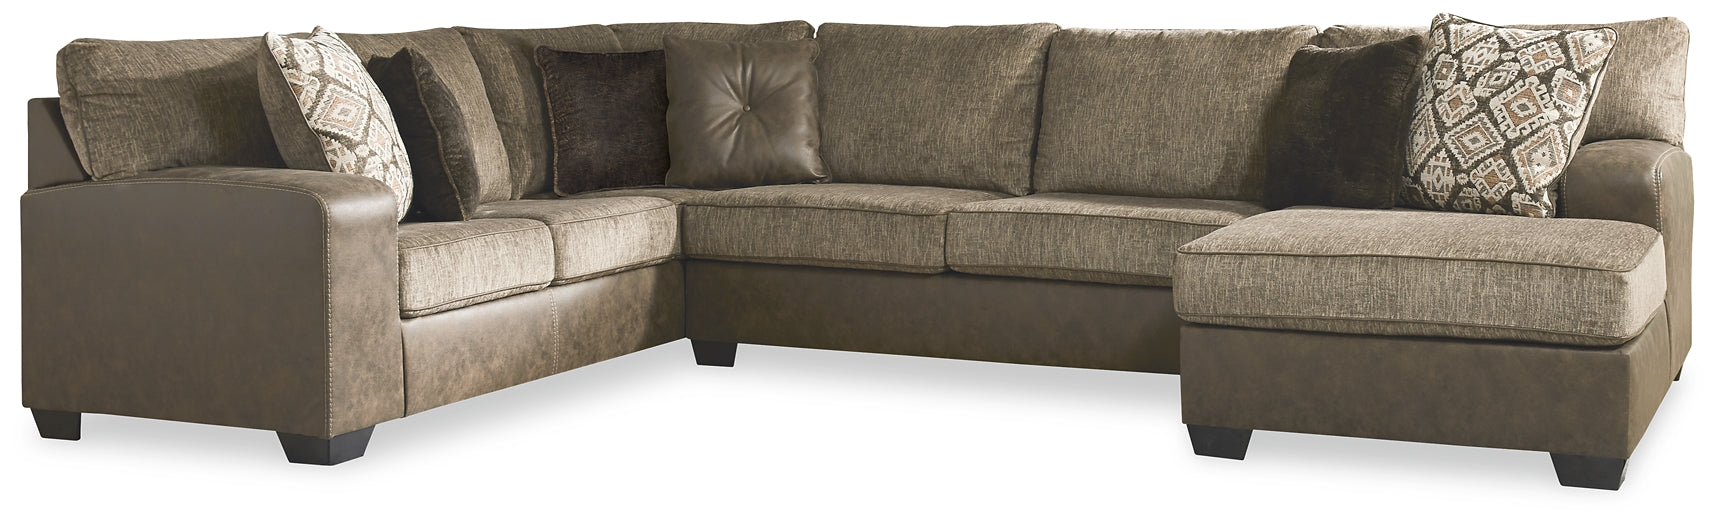 Abalone 3-Piece Sectional with Chaise Rent Wise Rent To Own Jacksonville, Florida